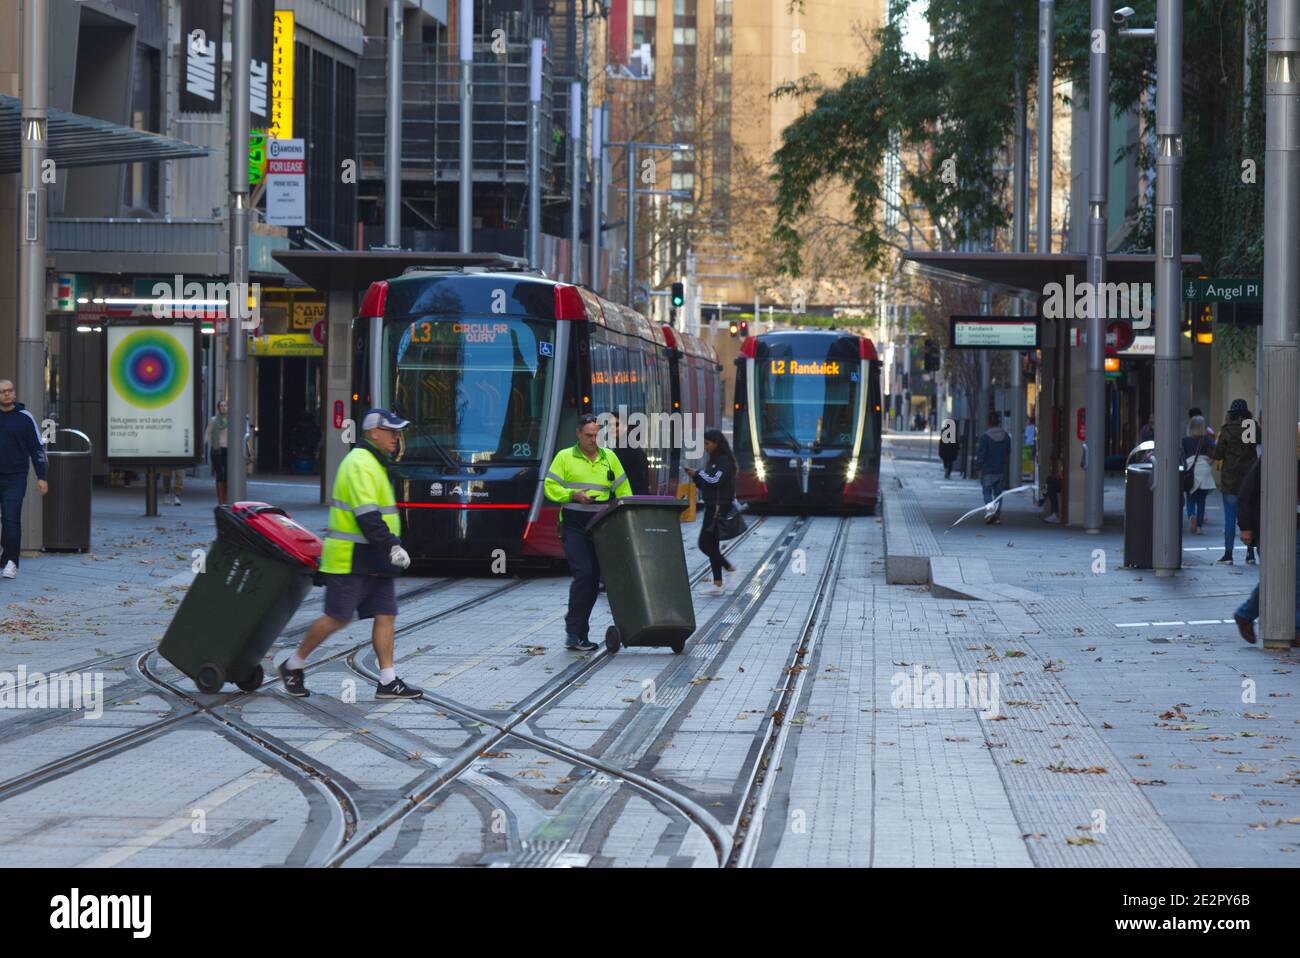 Council workers collecting rubbish in front of Sydney Light Rail public transport system on George Street Sydney Australia Stock Photo